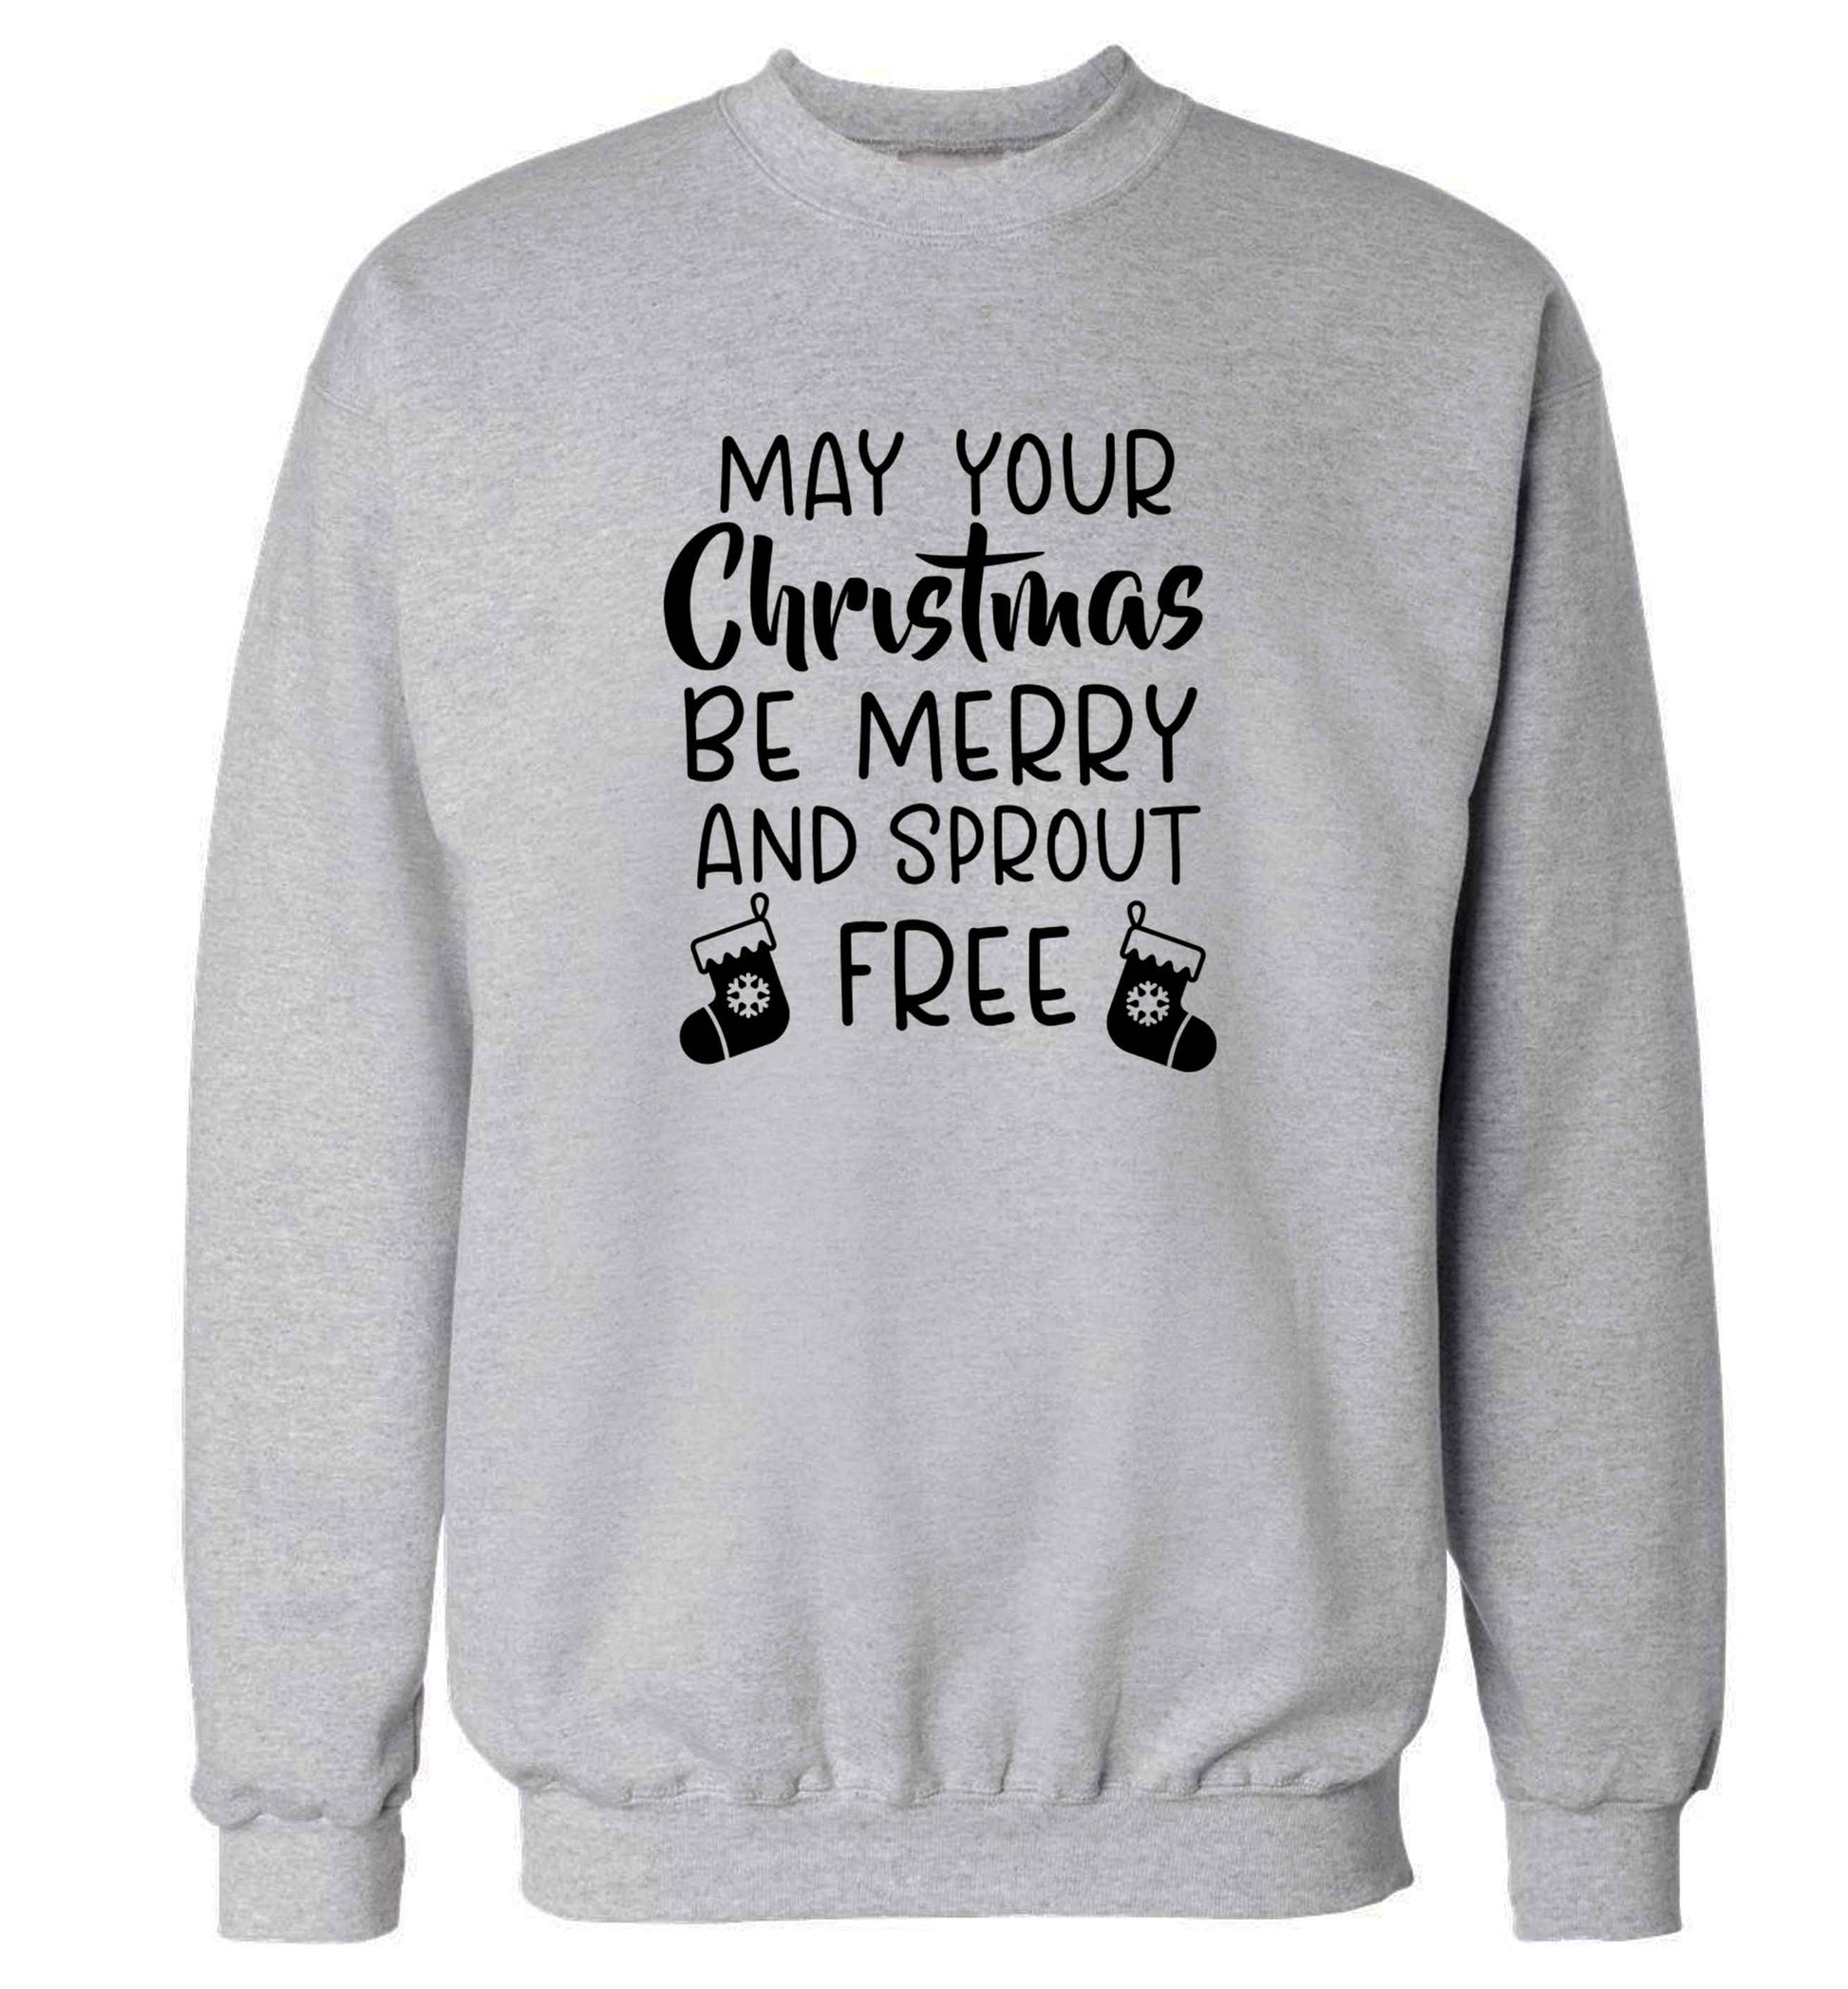 May your Christmas be merry and sprout free adult's unisex grey sweater 2XL